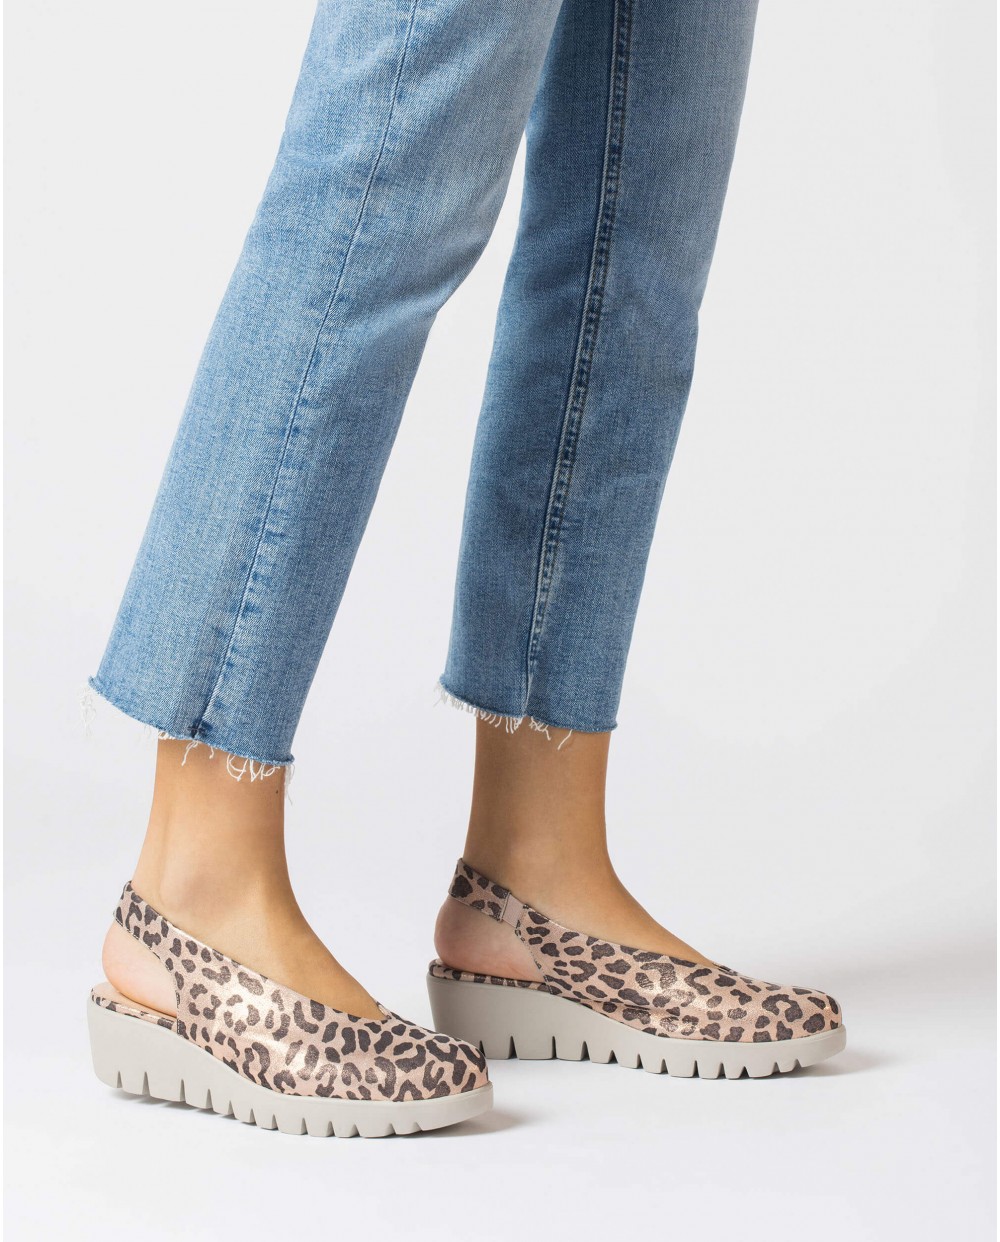 animal print leather loafer mule